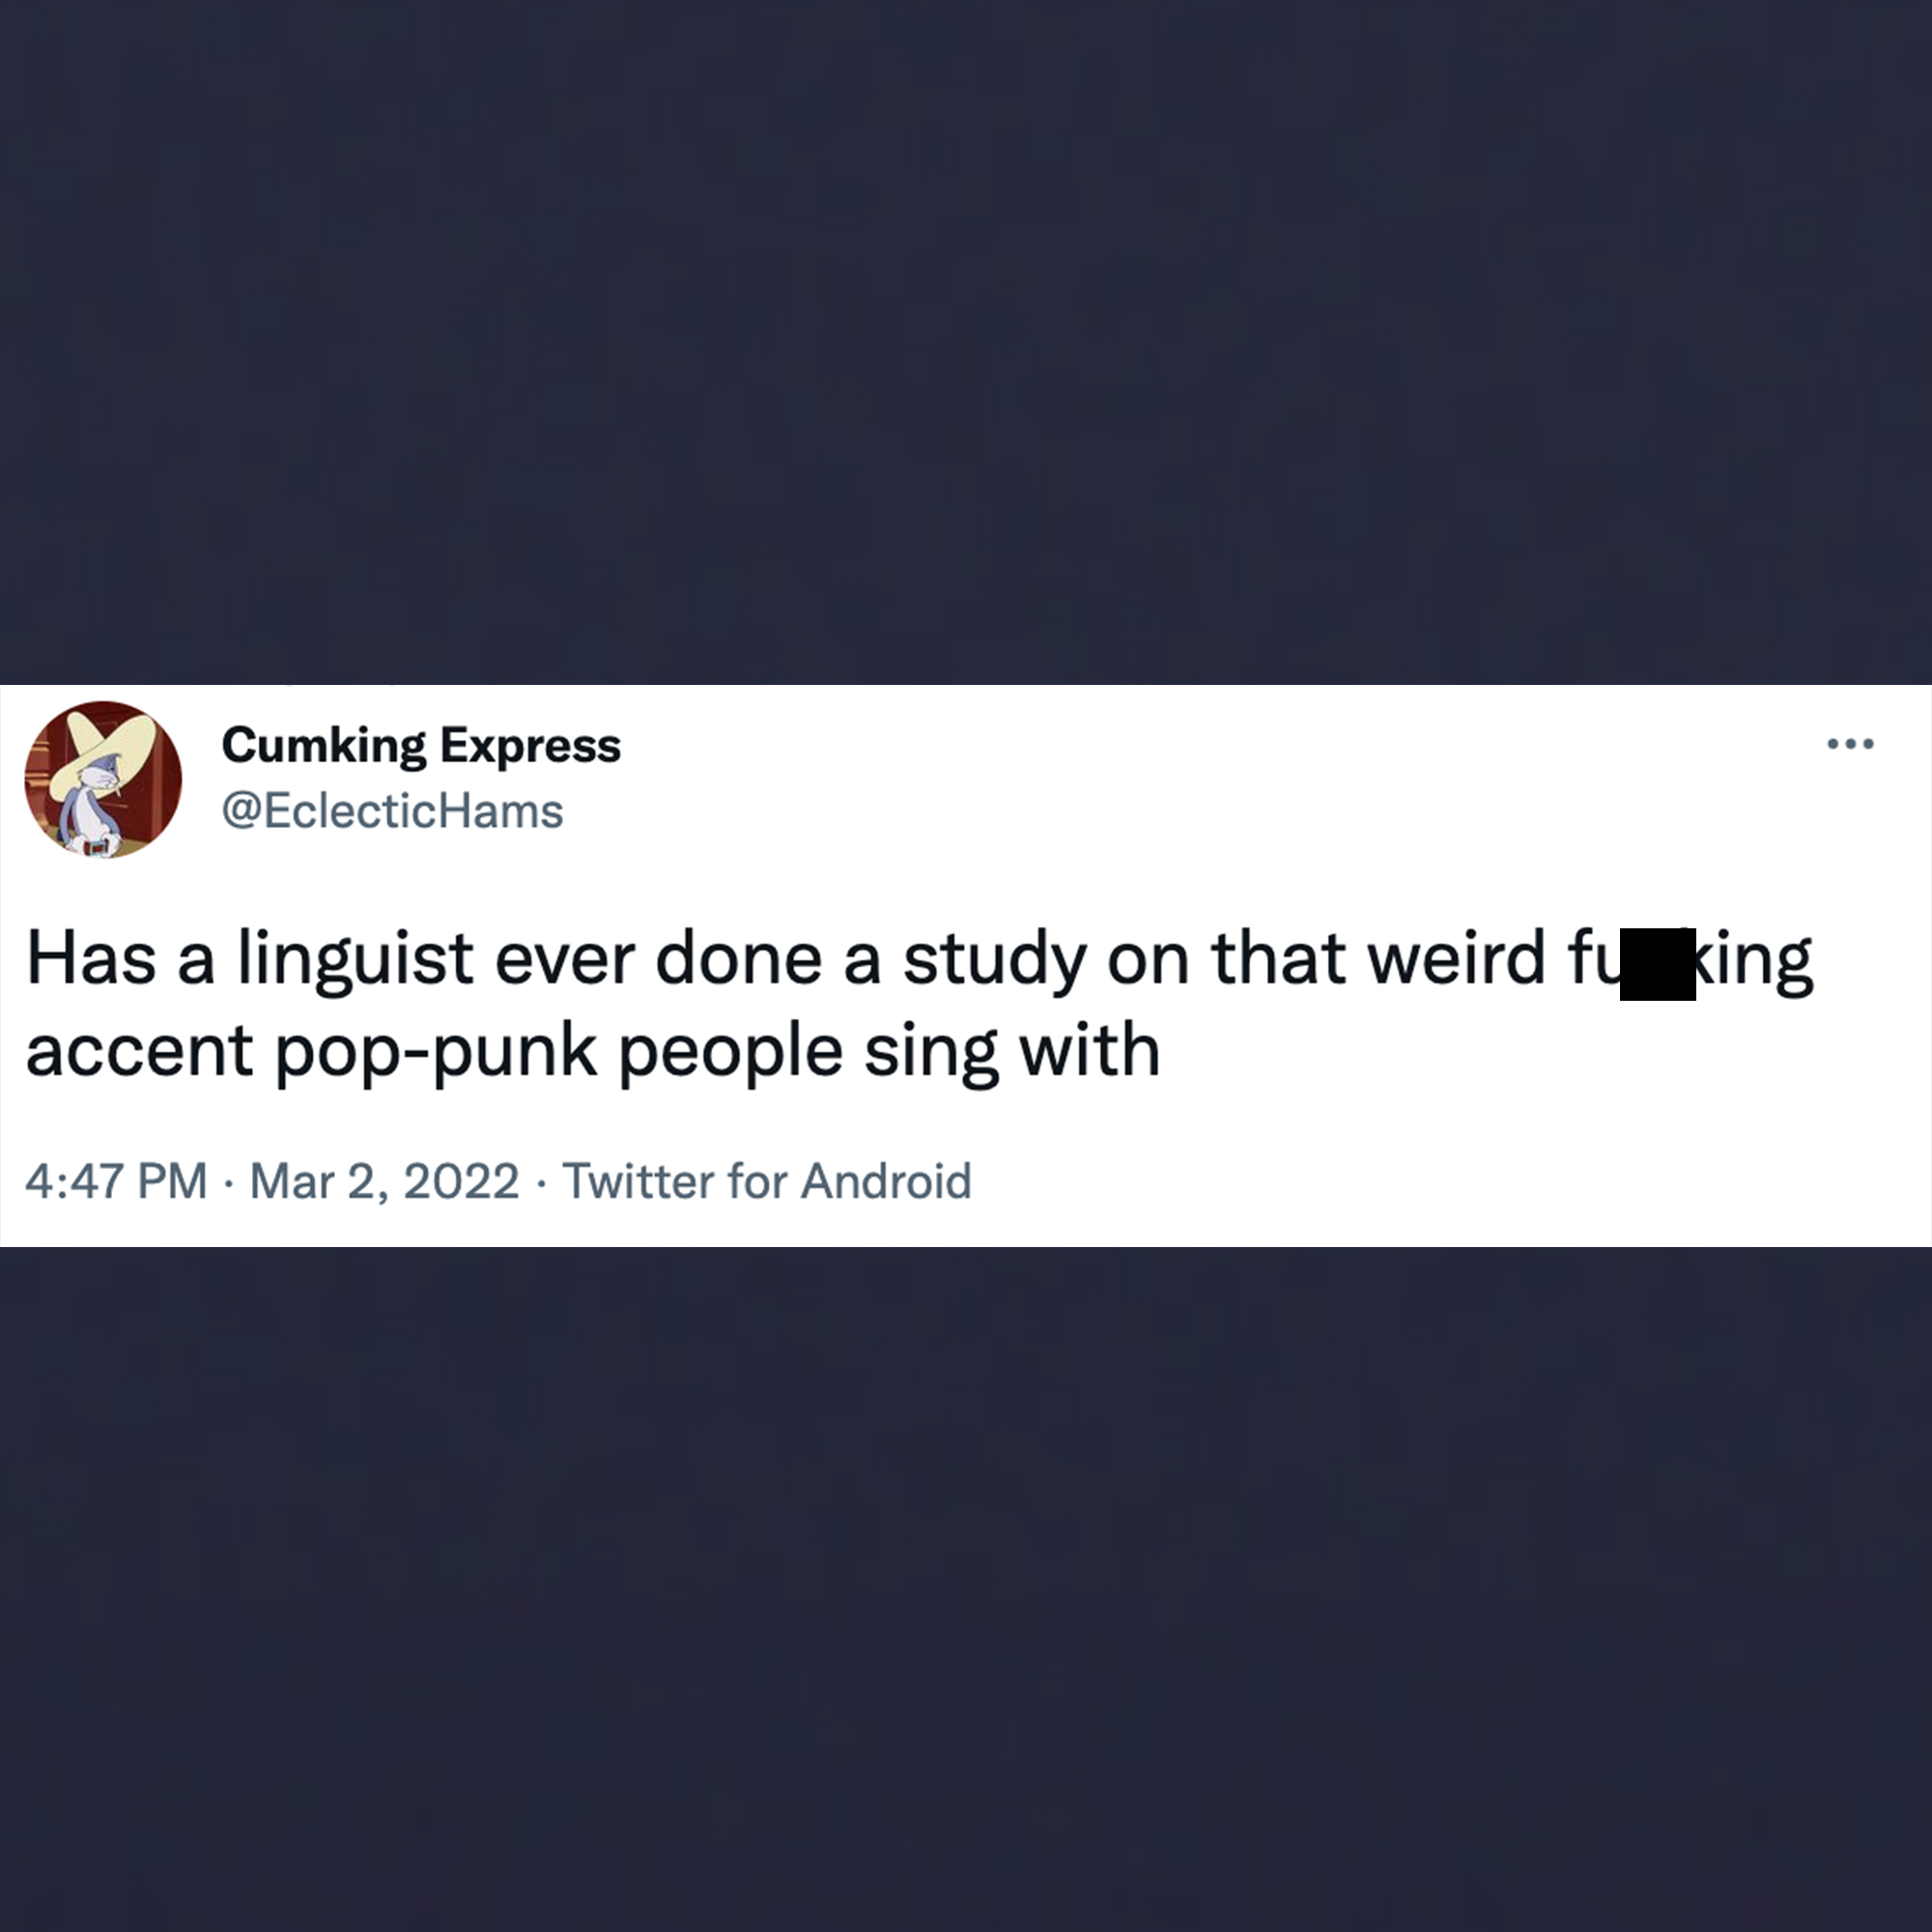 funny tweets - website - .. Cumking Express Has a linguist ever done a study on that weird f king accent poppunk people sing with . . Twitter for Android